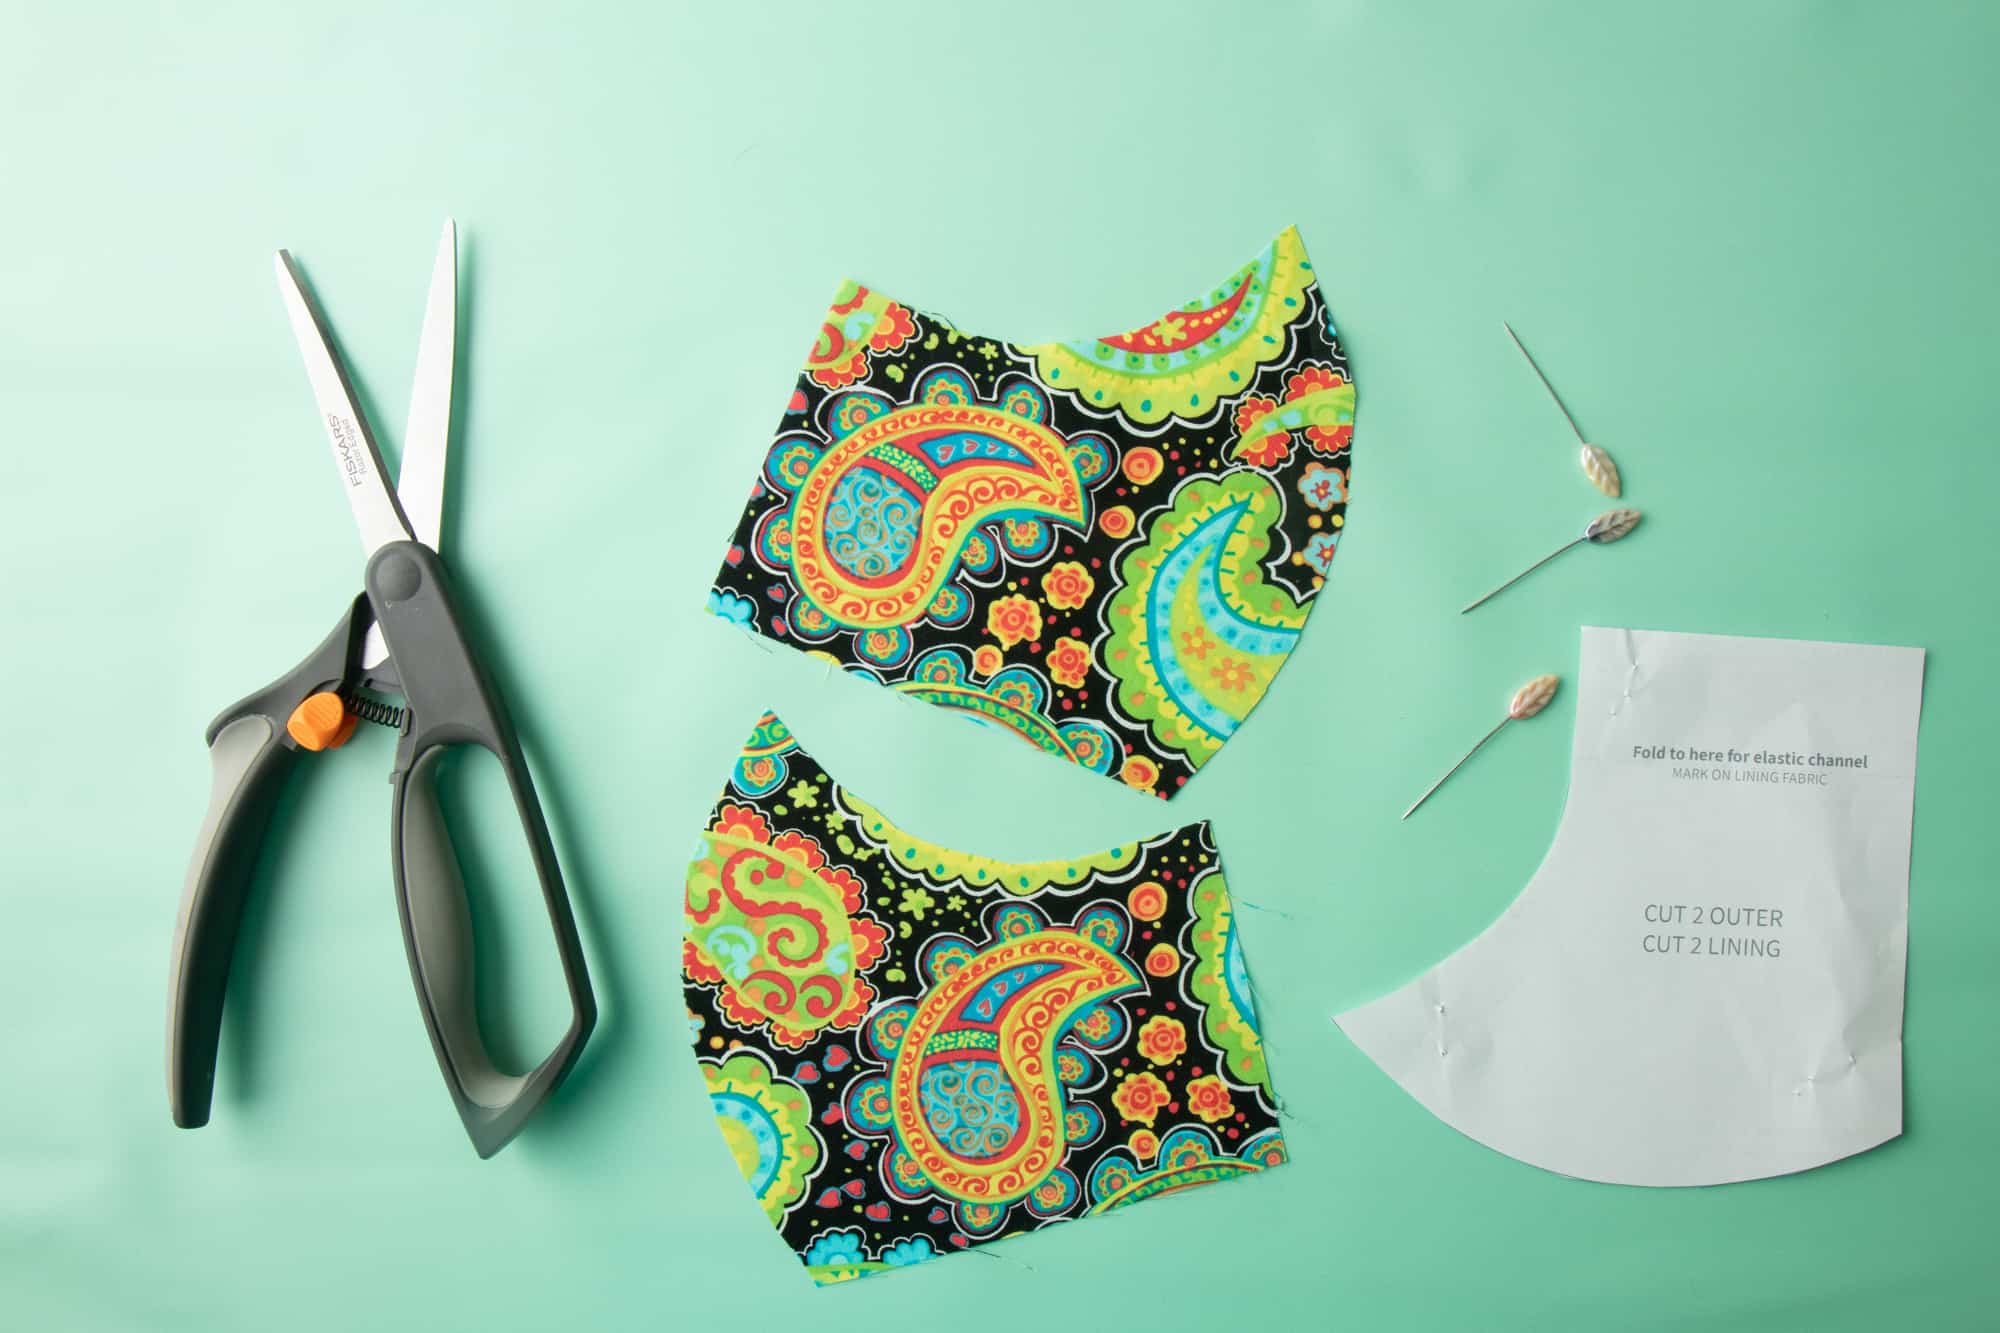 Scissors sit next to cut out fabric pieces, paper pattern pieces, and pins.